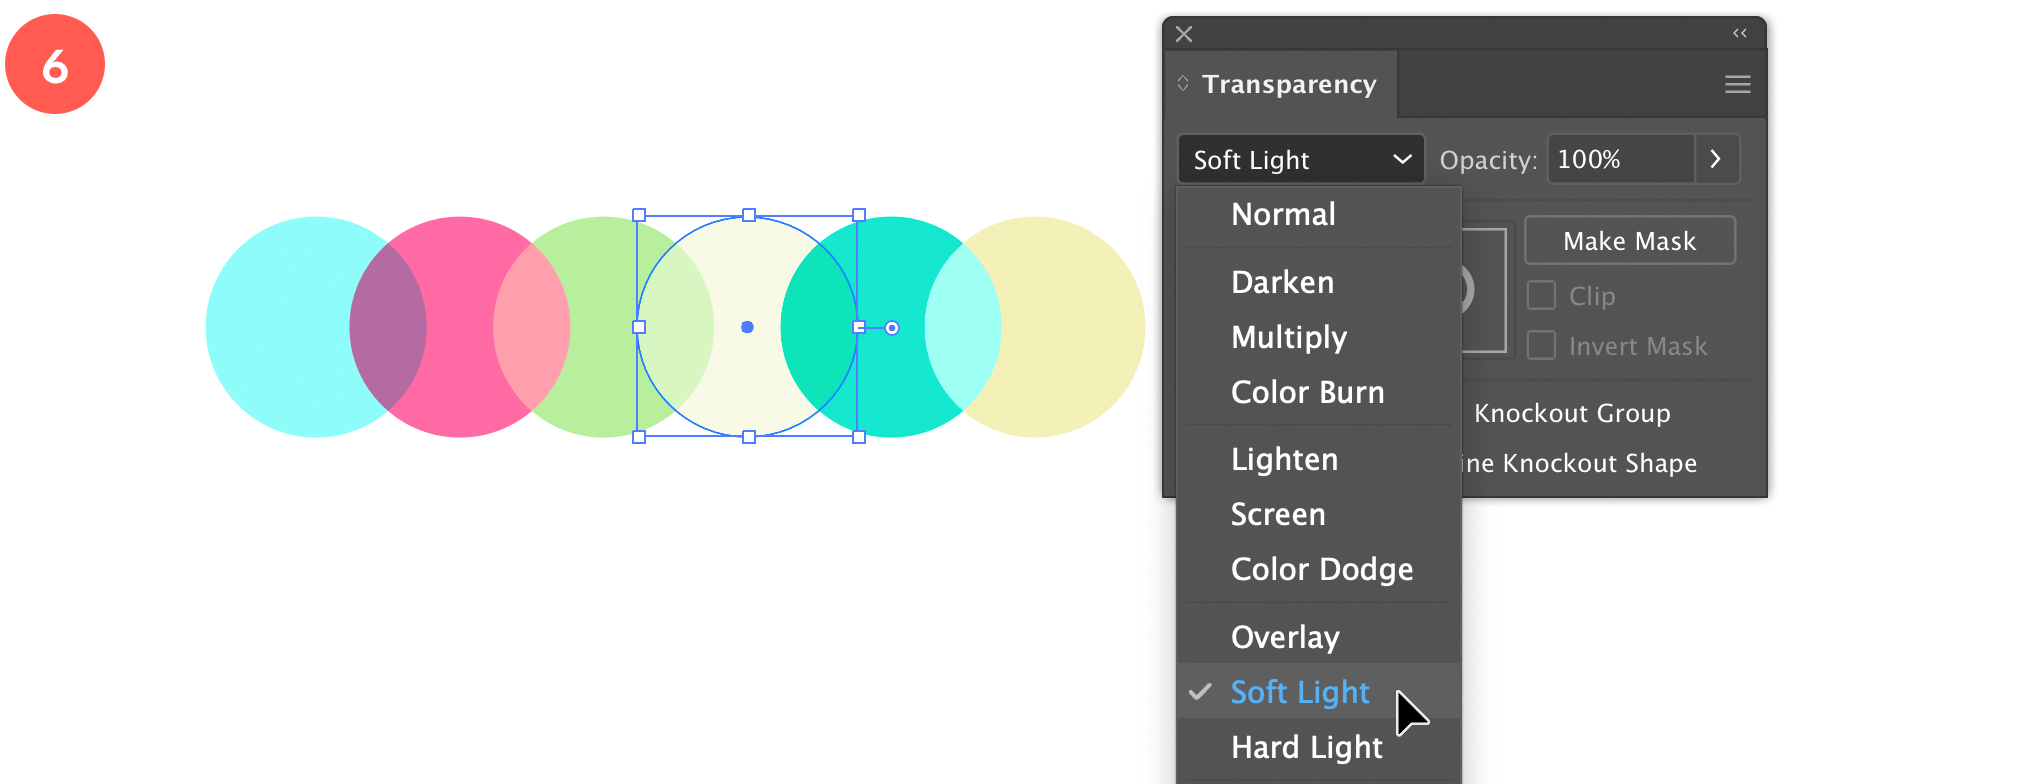 Experiment with transparency modes